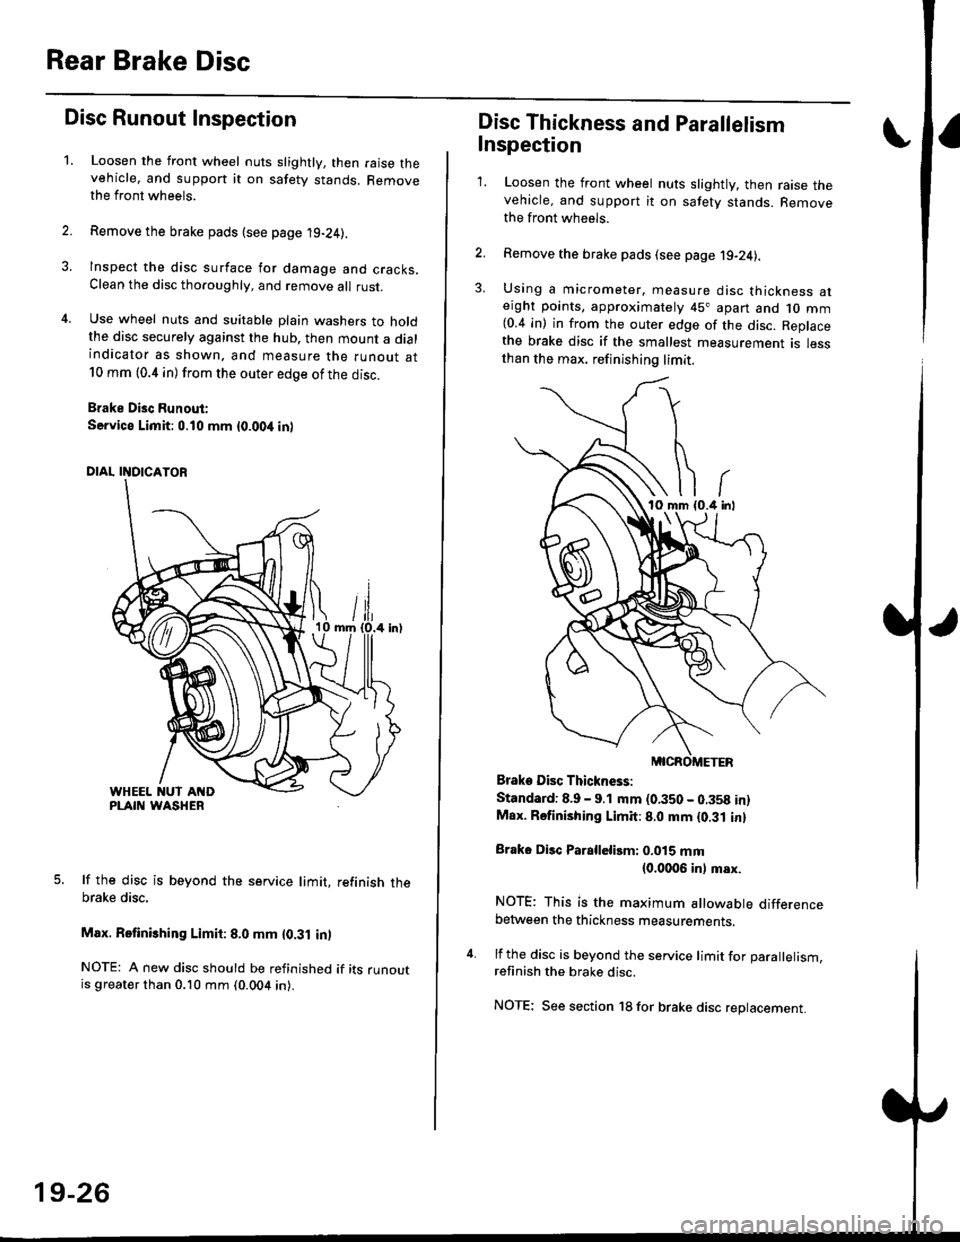 HONDA CIVIC 1999 6.G Workshop Manual Rear Brake Disc
Disc Runout Inspection
1.Loosen the front wheel nuts slightly, then raise thevehicle, and suppon it on safety stands. Removethe front wheels.
Remove the brake pads (see page 19-24).
In